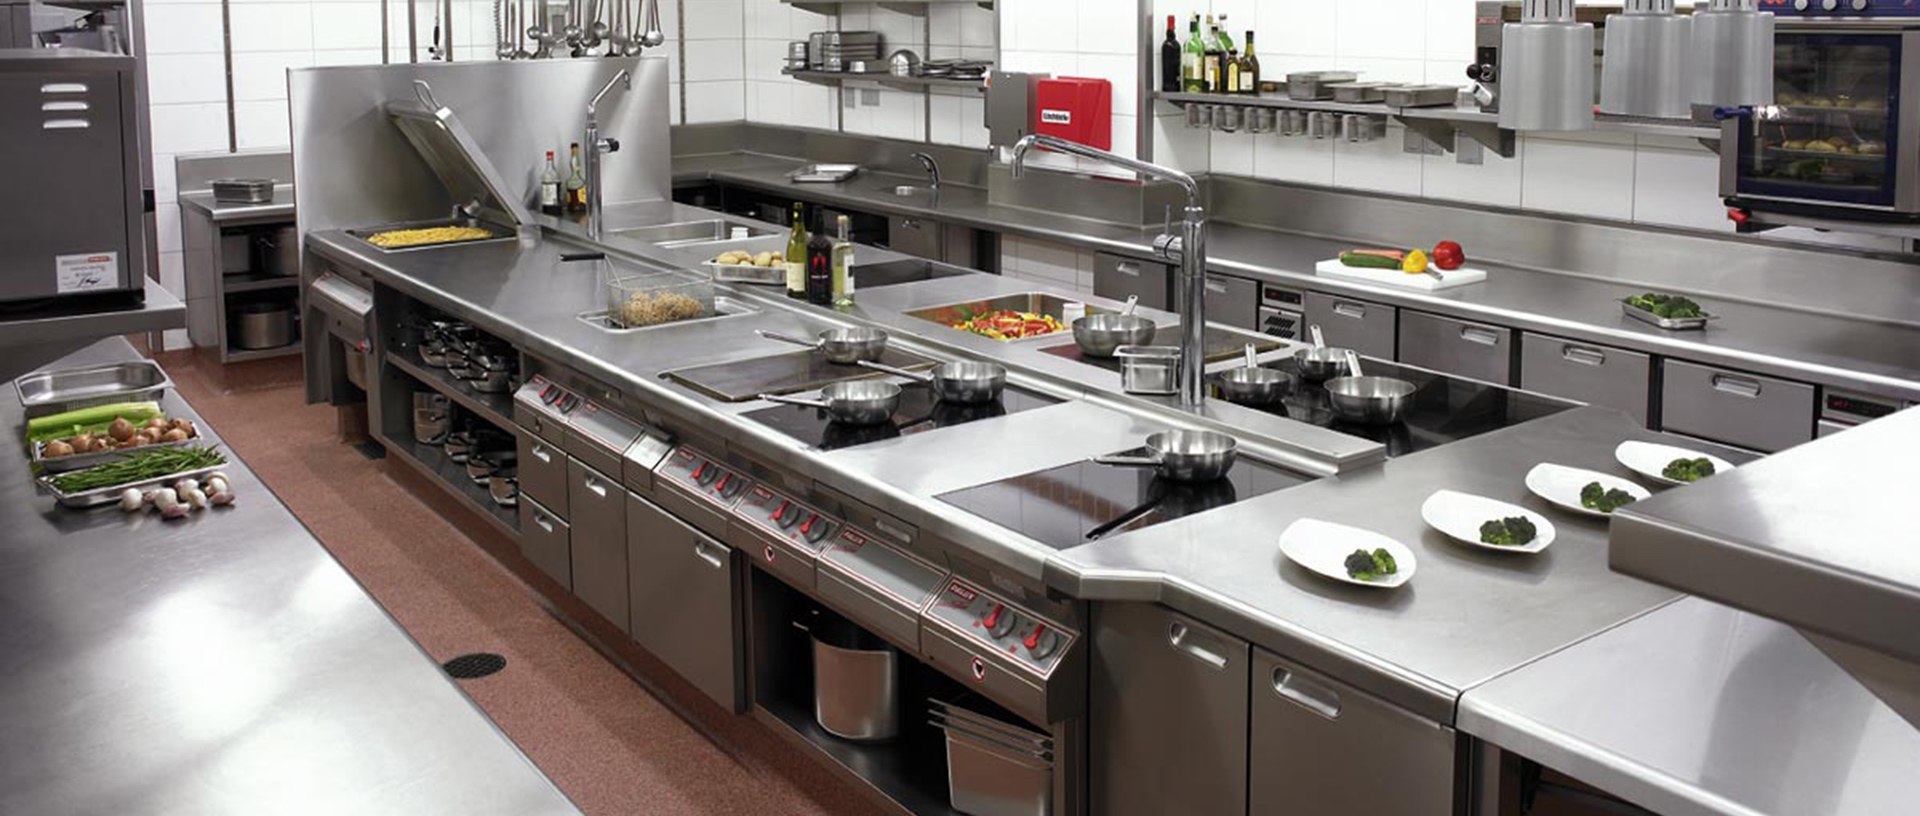 CCE Commercial Catering Equipment LLC Dubai